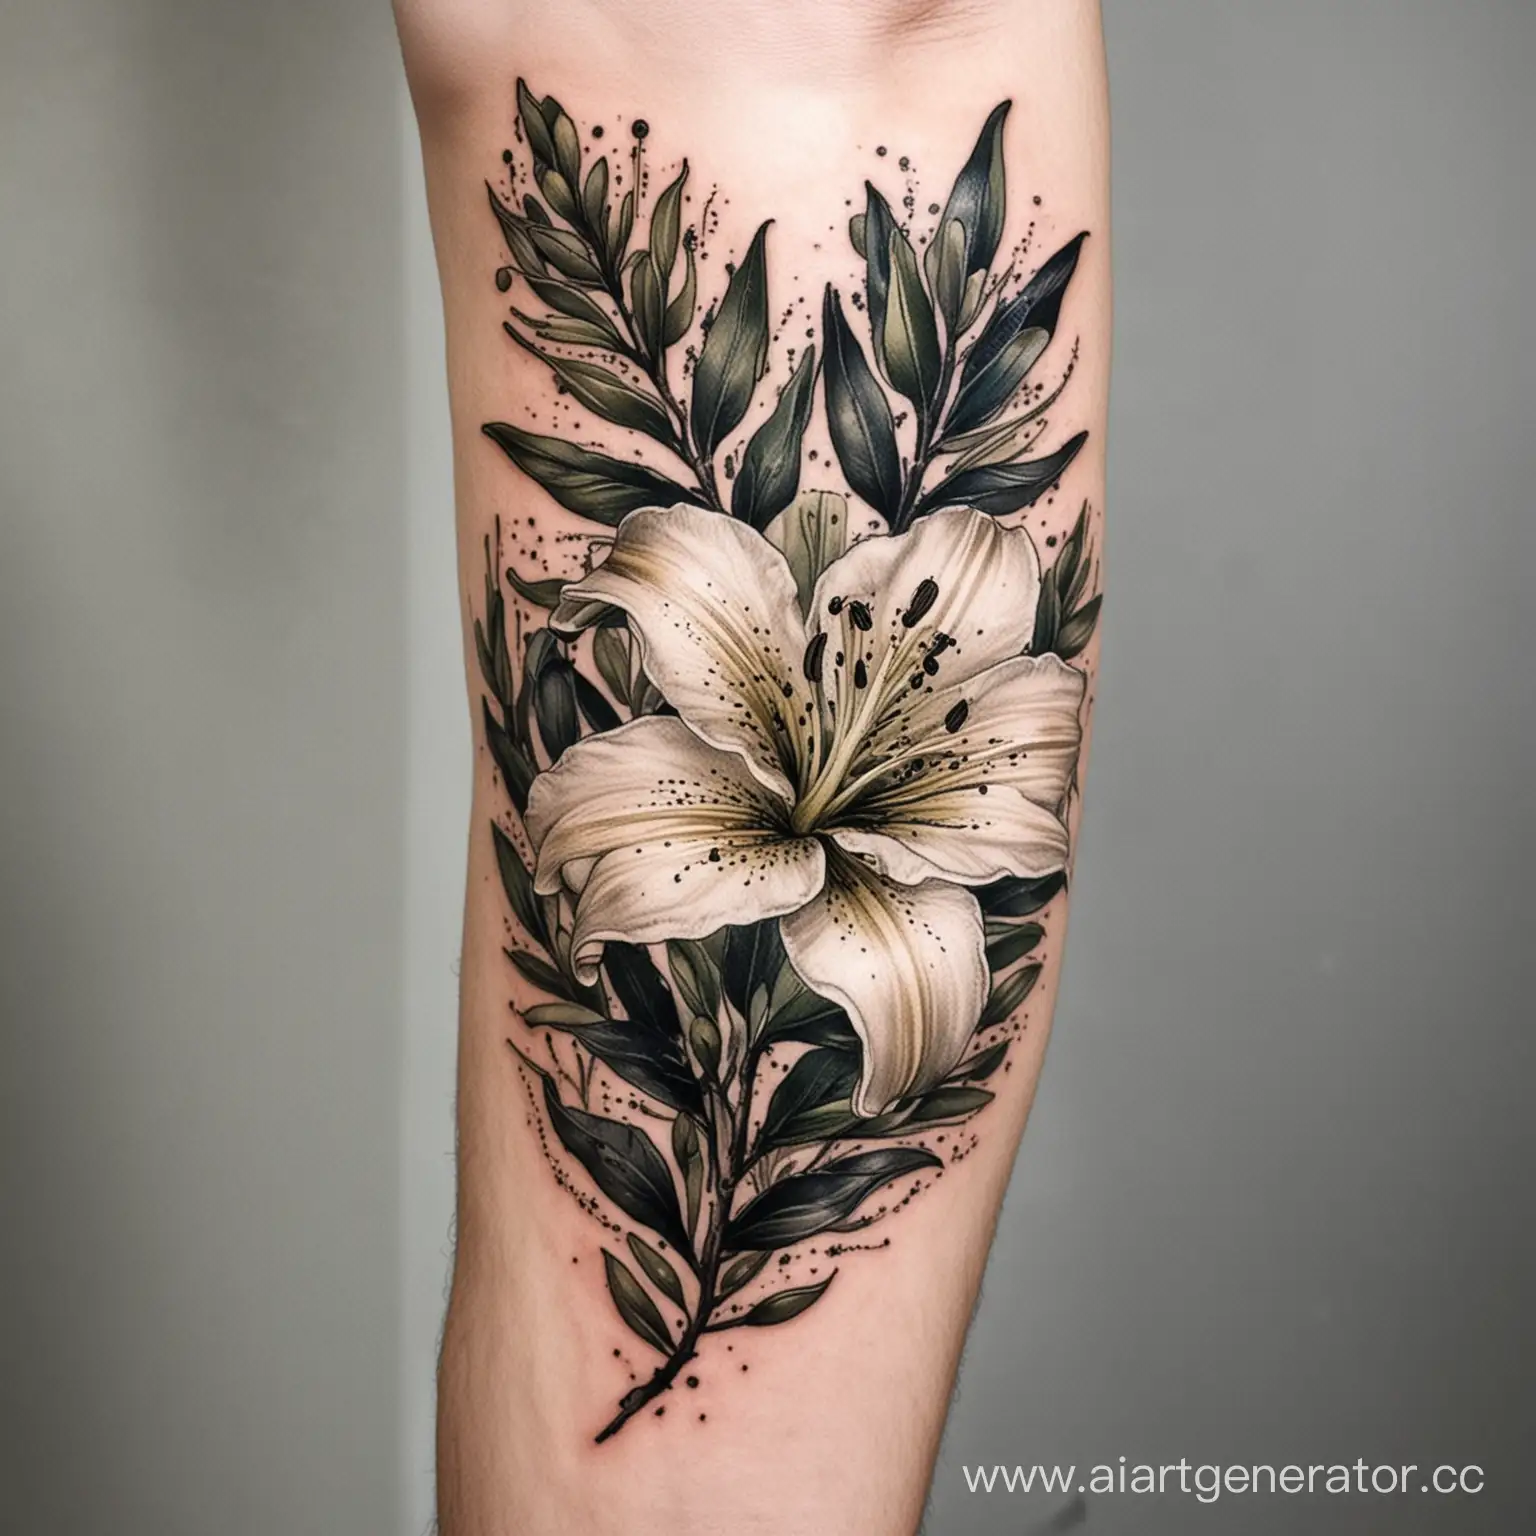 Masculine-Tattoo-Design-with-Olive-Branch-and-Lily-Flower